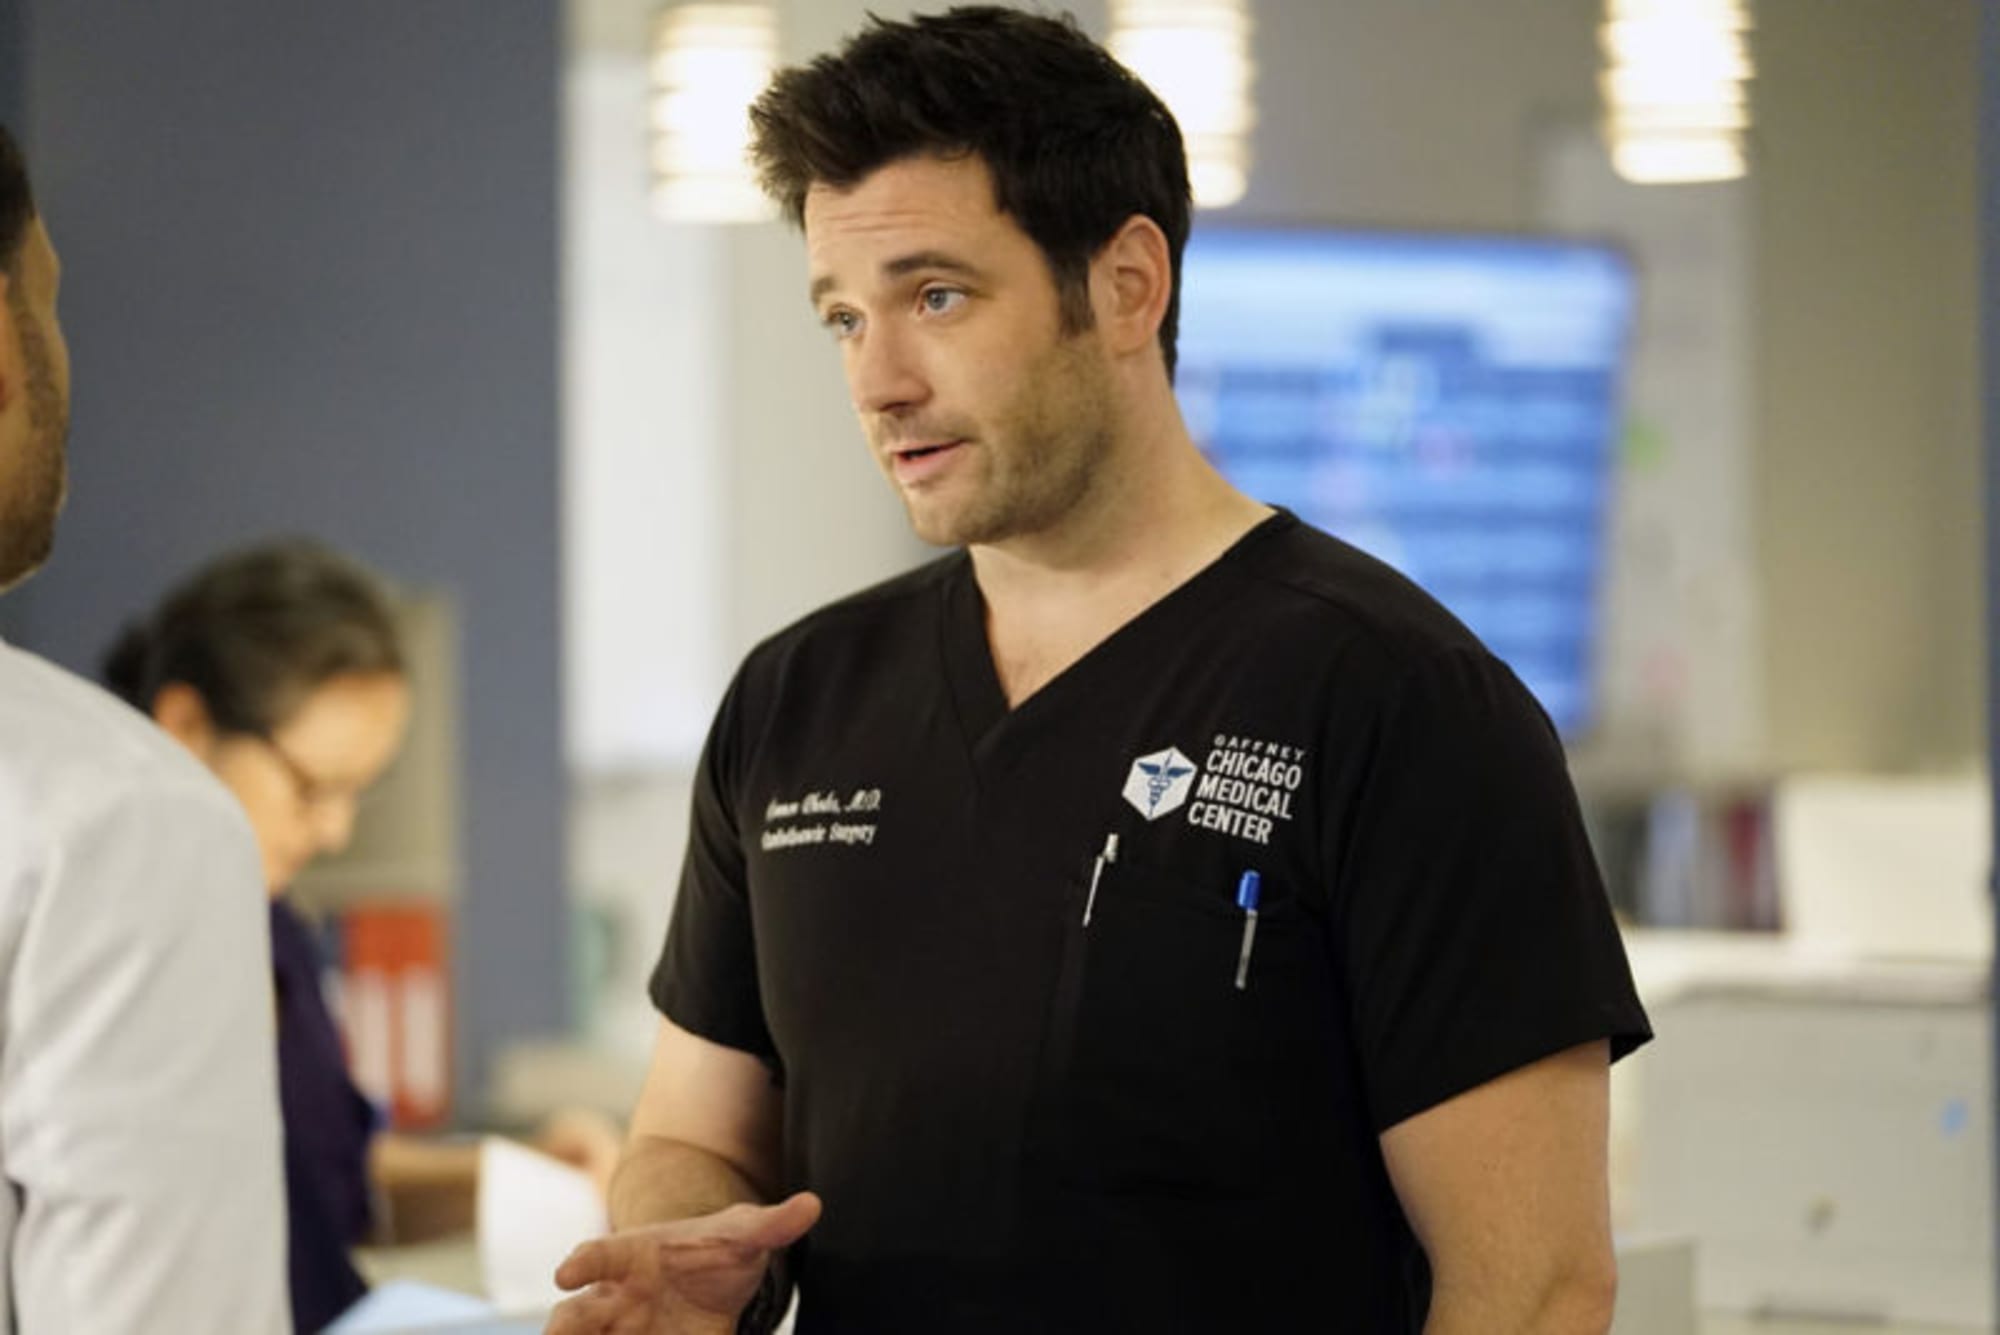 Dr Rhodes Chicago Med Chicago Med season 3 by character: Connor Rhodes